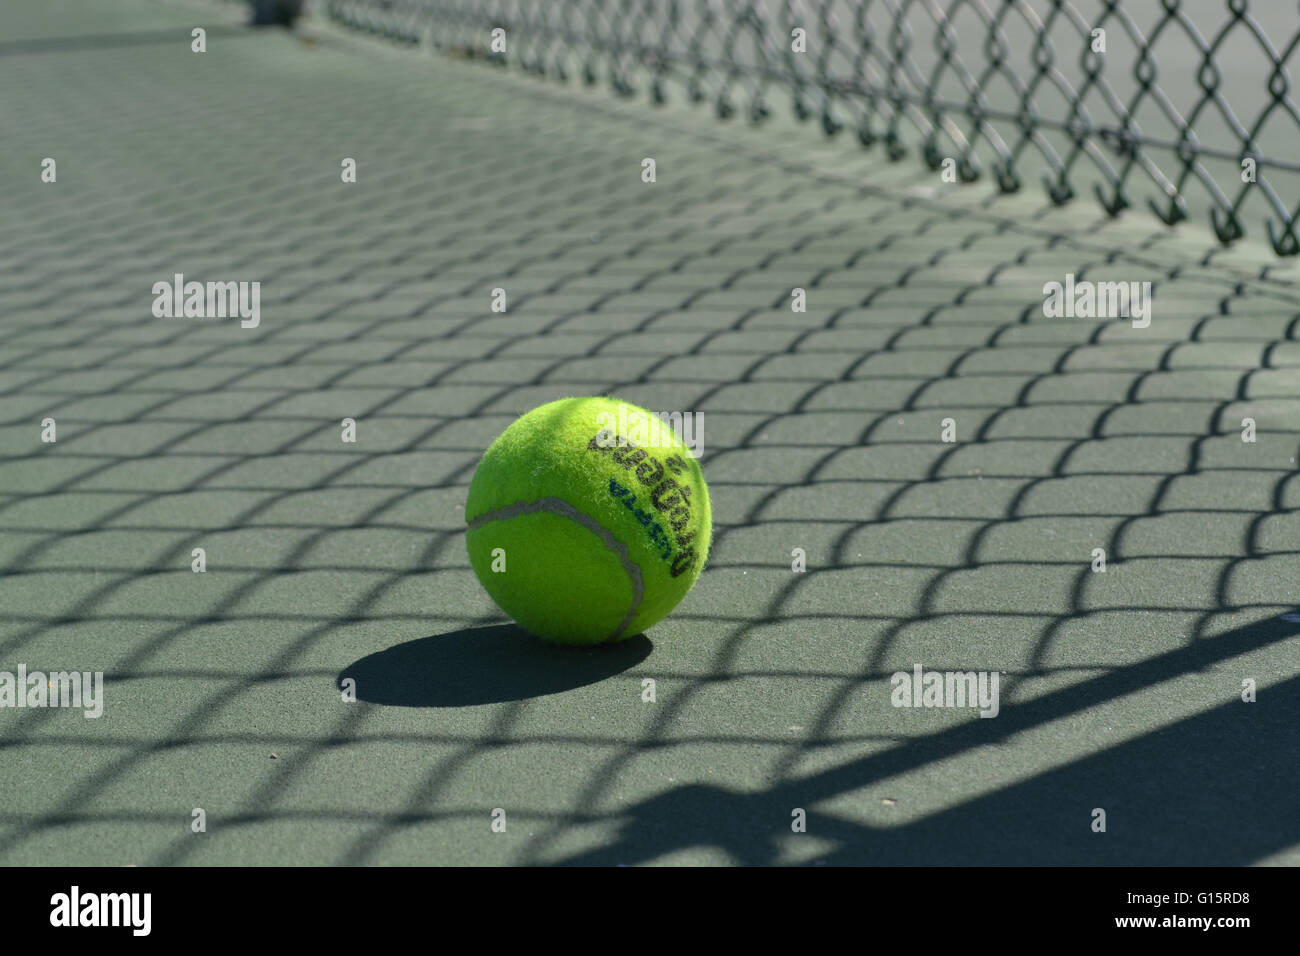 Tennis ball on the courts Stock Photo